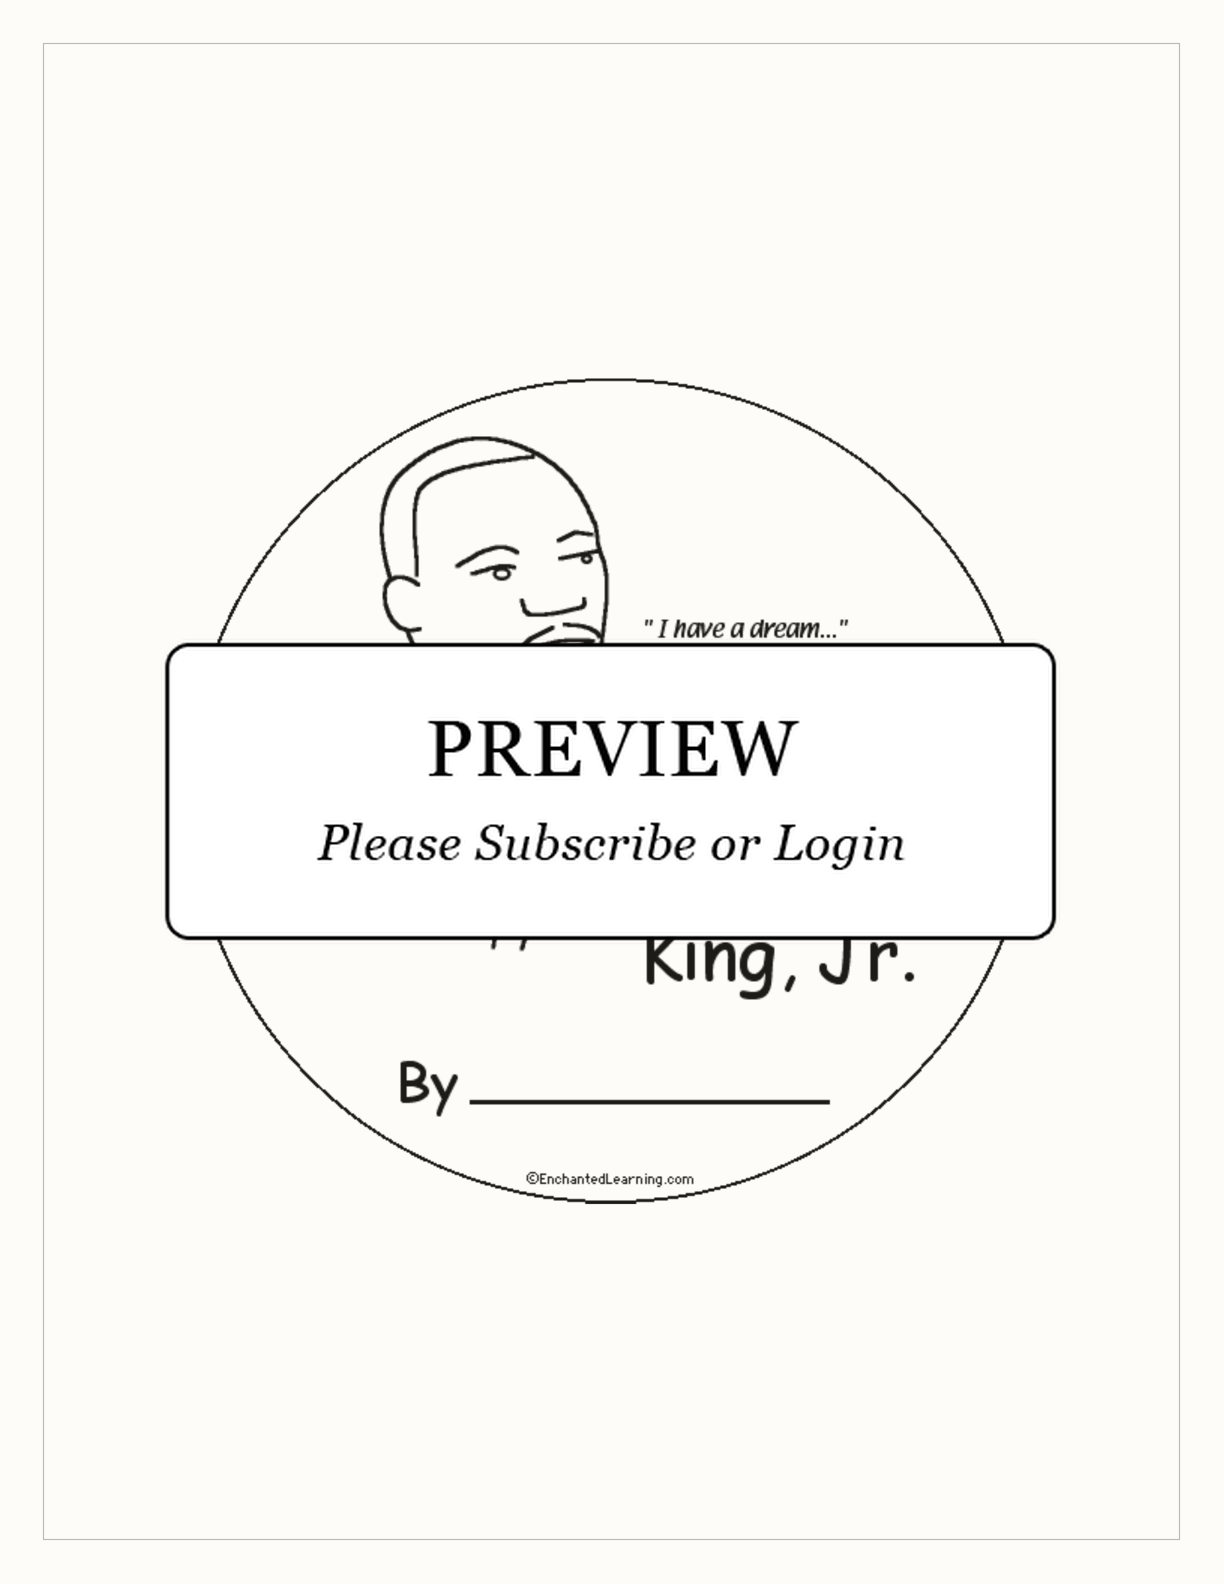 Martin Luther King, Jr., Beginning Reader Book interactive printout page 1